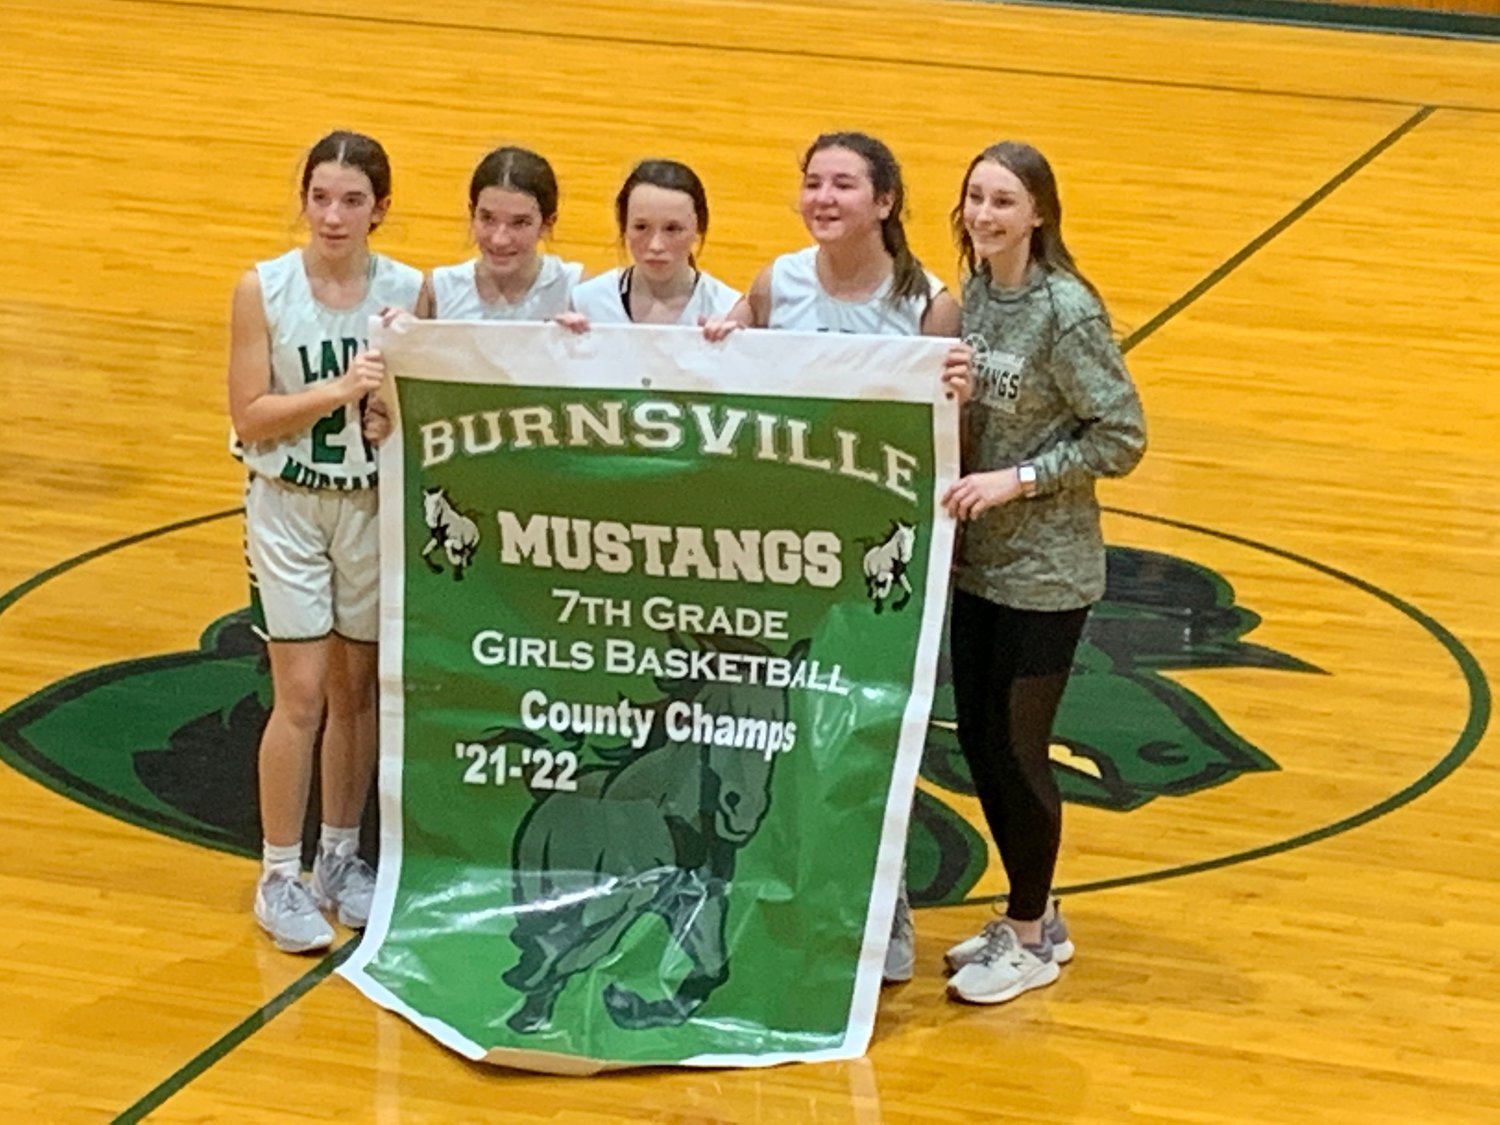 Burnsville's 8th grade girls with their 7th grade county champs banner from last year.